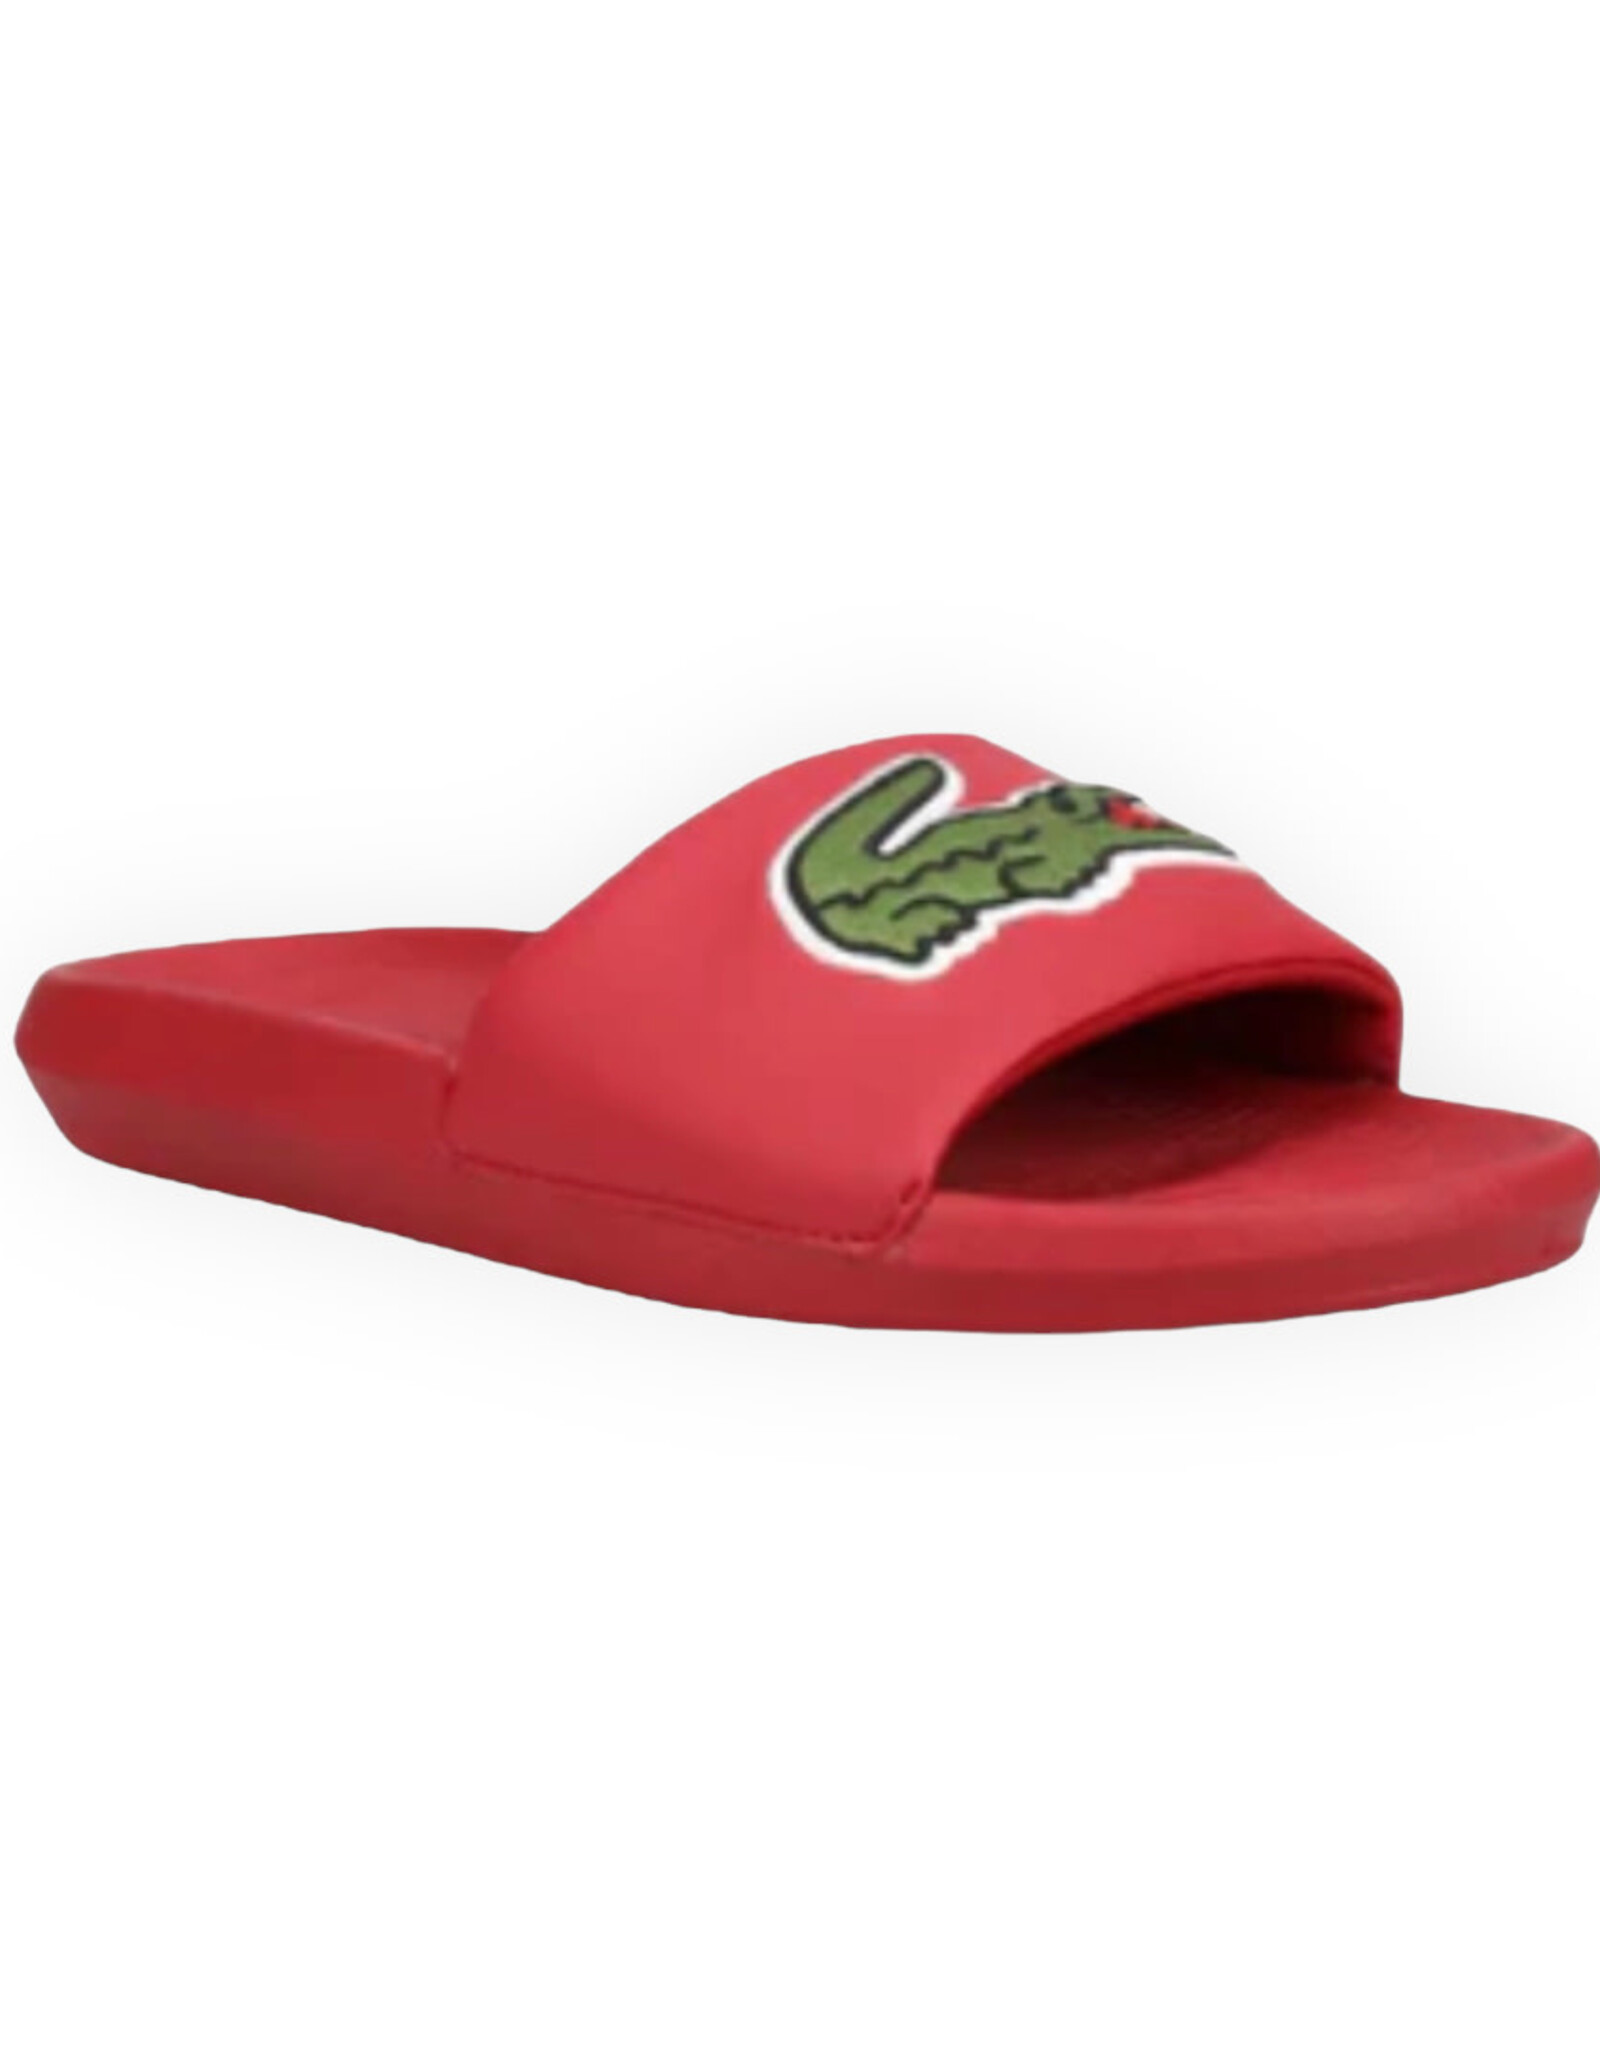 Lacoste Lacoste Croco Slides 319 Synthetic